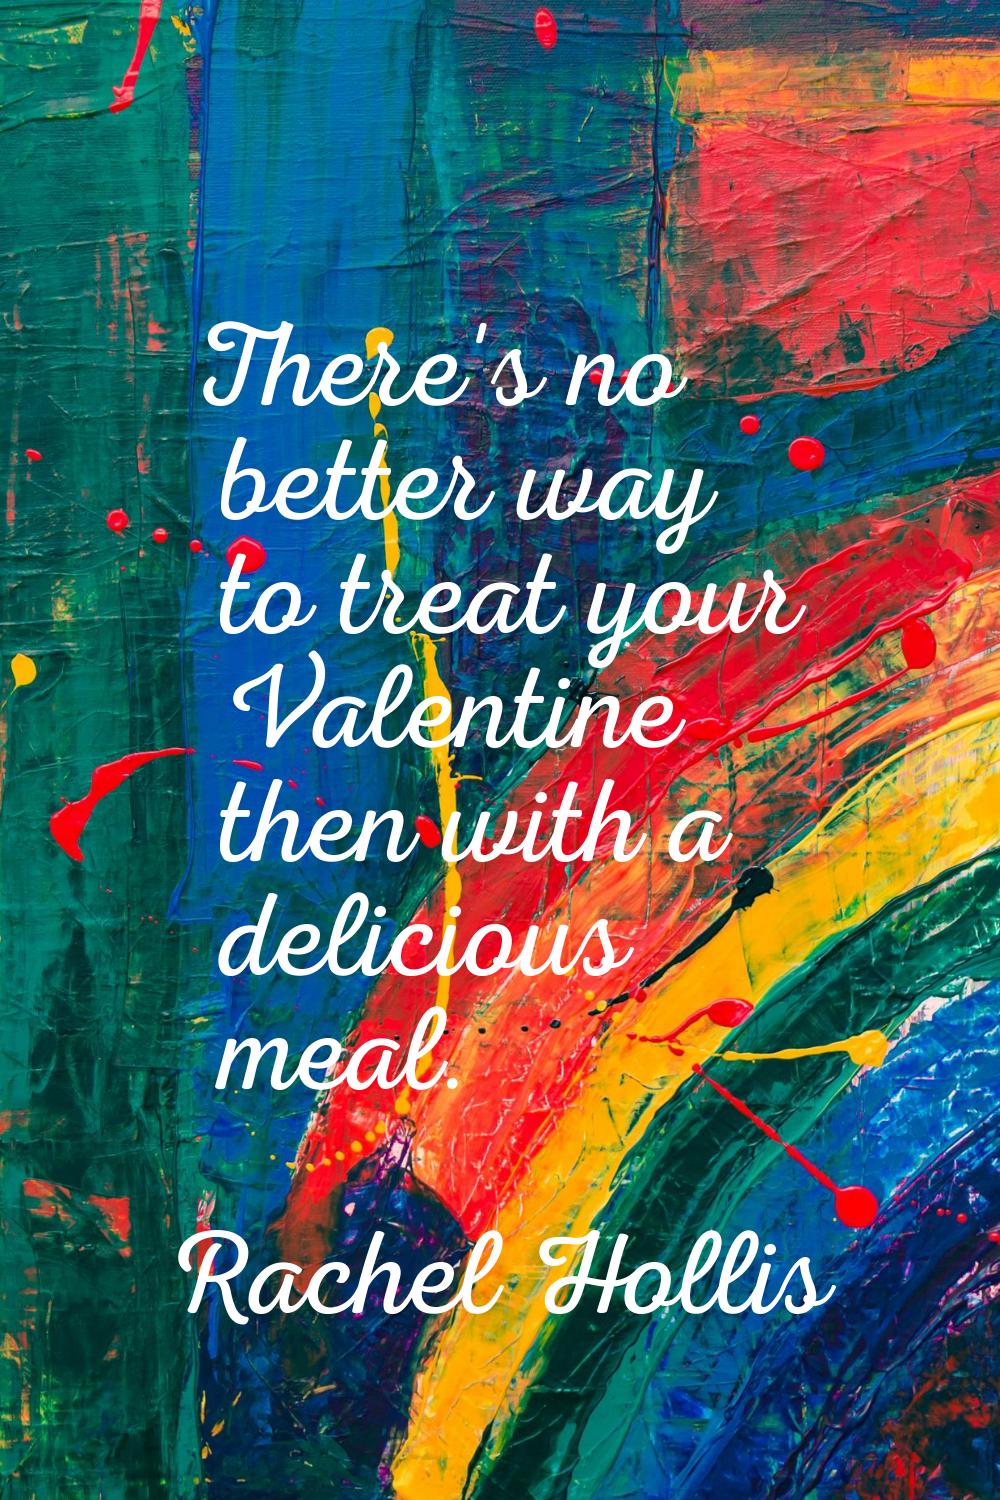 There's no better way to treat your Valentine then with a delicious meal.